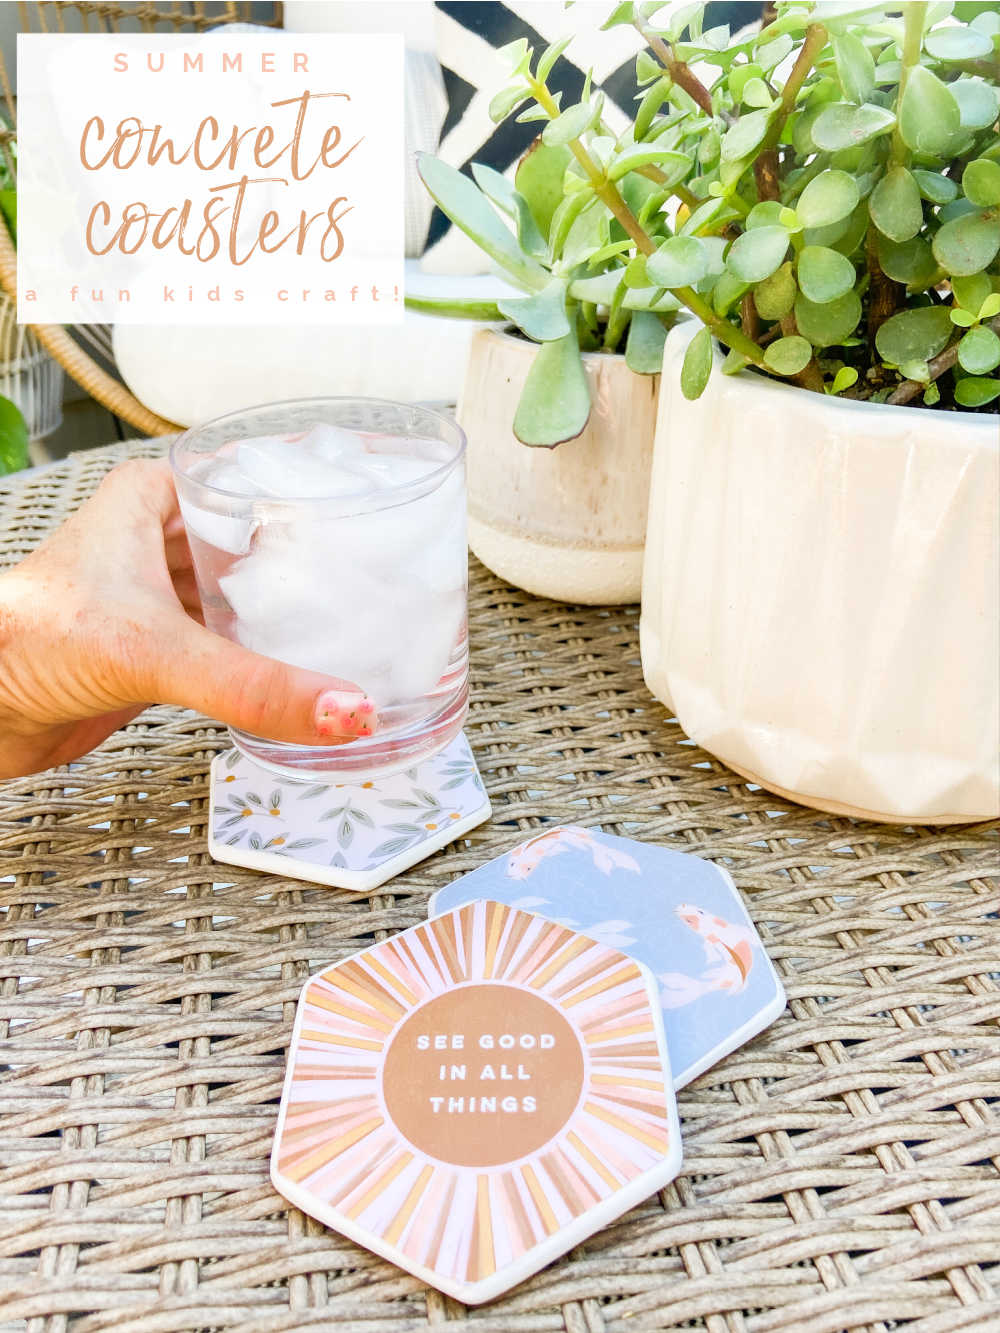 Summer Decoupage Concrete Coasters. Personalize concrete coasters with pretty paper for a DIY that's super easy and so fun to make with kids! 